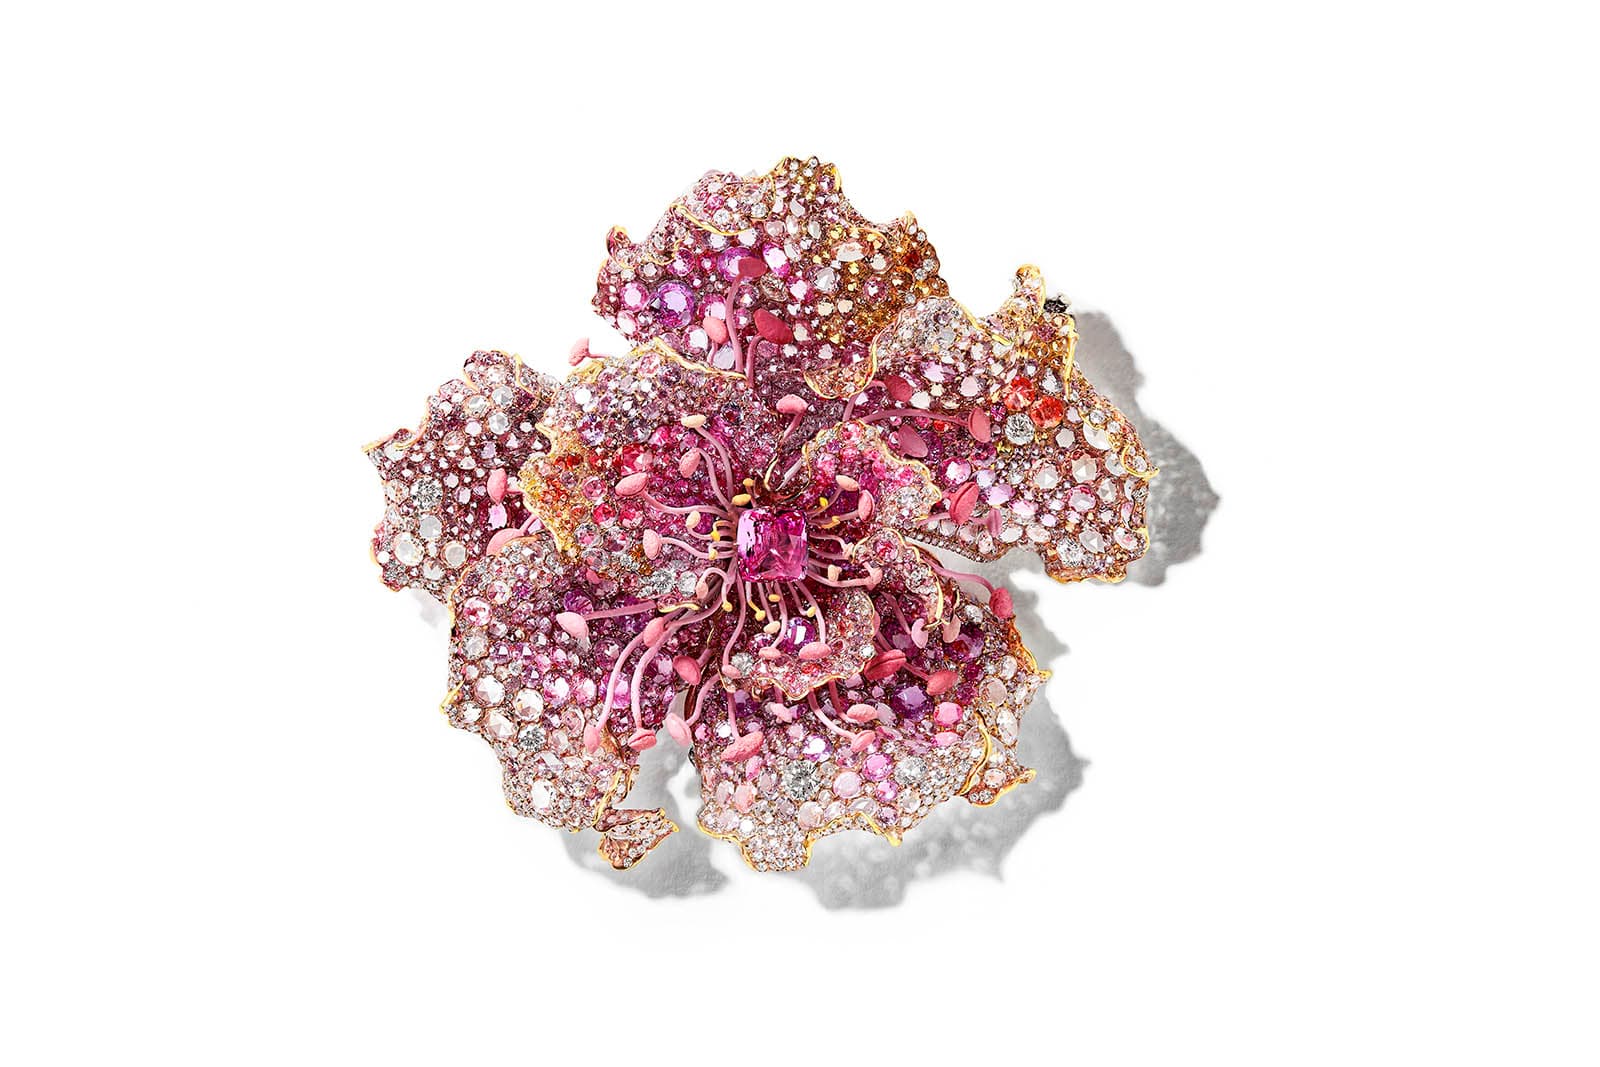 Cindy Chao 2019 Black Label Masterpiece IX ‘Damask Rose’ brooch from the ‘Tango in the Garden’ collection with 8.00ct cushion cut pink sapphire, 53.65ct of diamonds, 240.23ct pink sapphires, and orange sapphires in titanium, white gold and lacquer